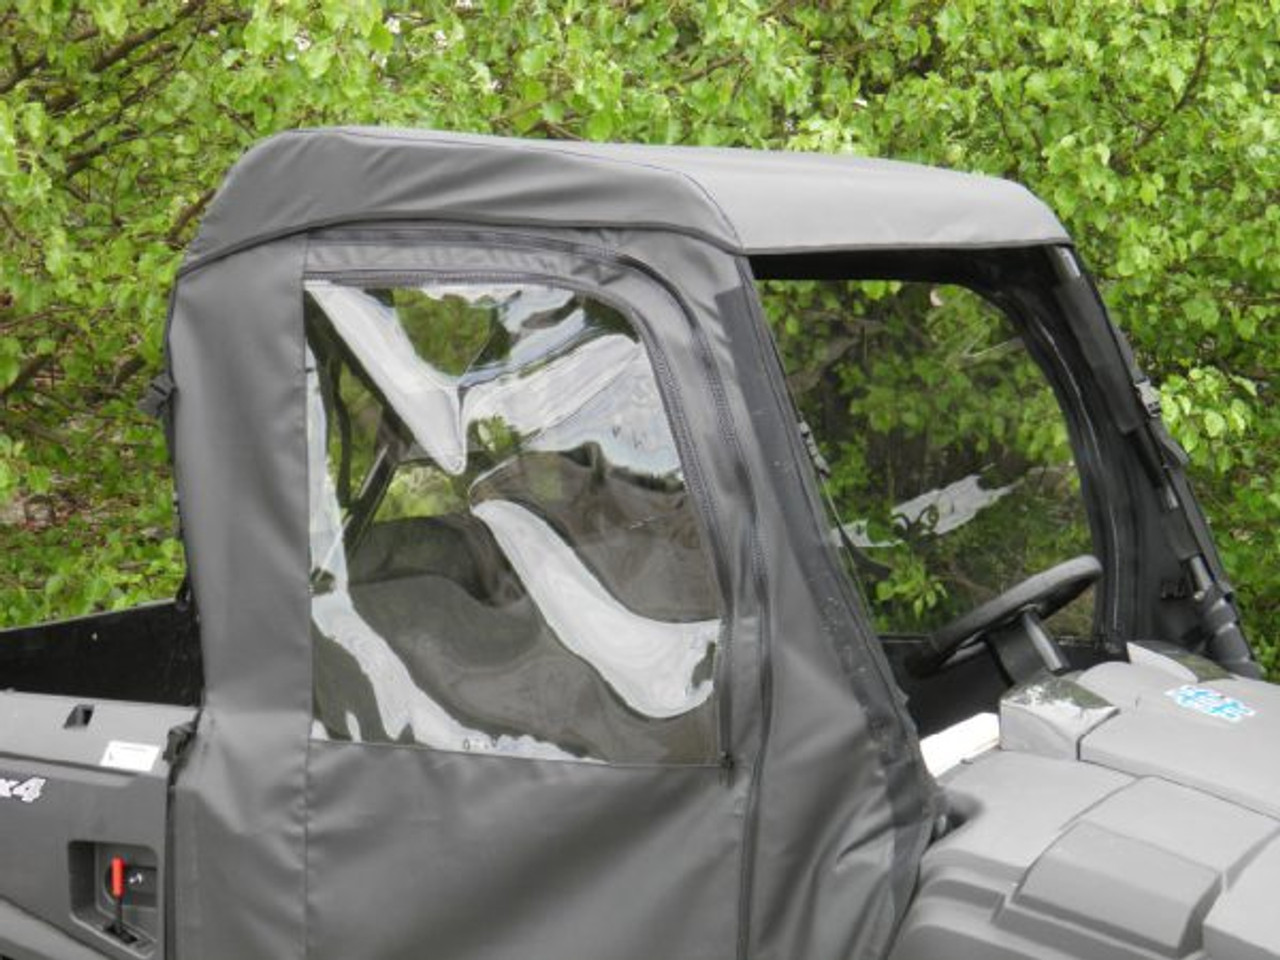 Kymco UXV 450i Full Cab Enclosure for Hard Windshield side view